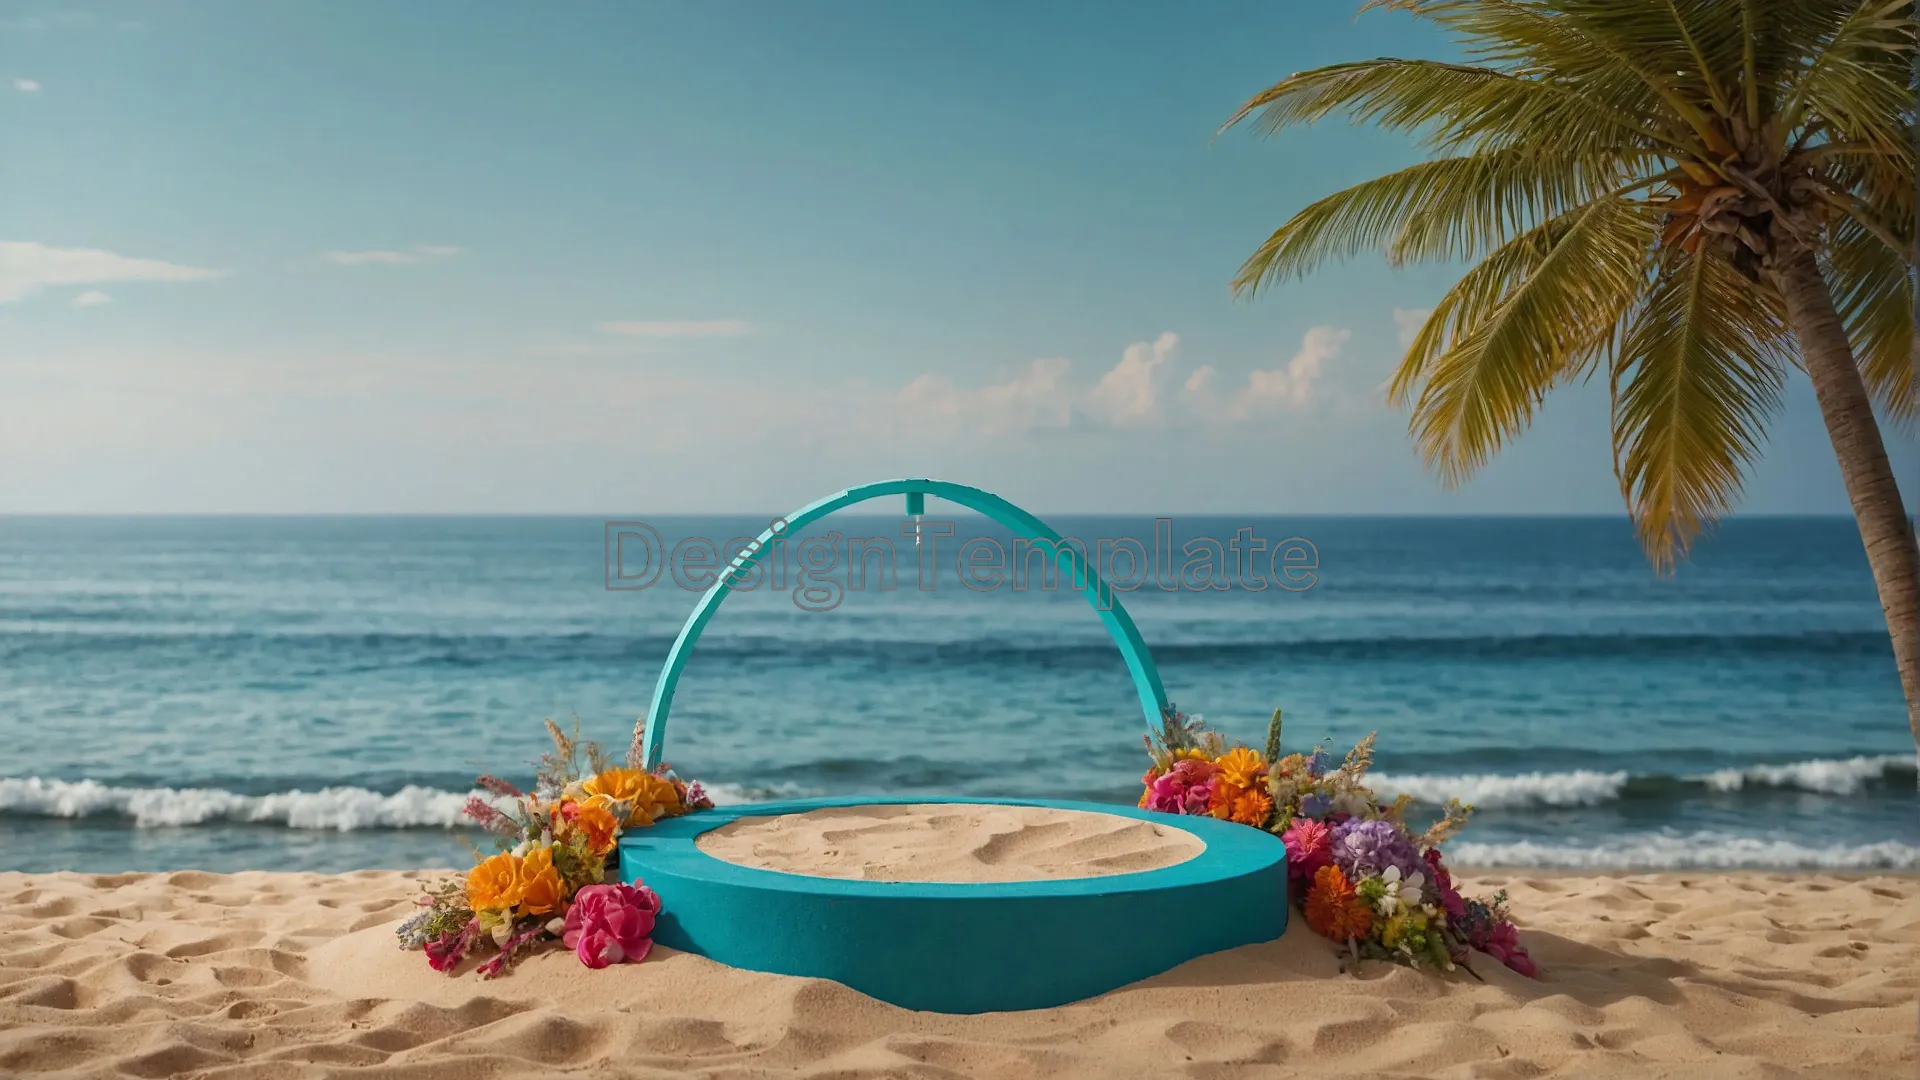 Captivating 3D Circle Podium Image with Fresh Colors for a Summer Sale Event